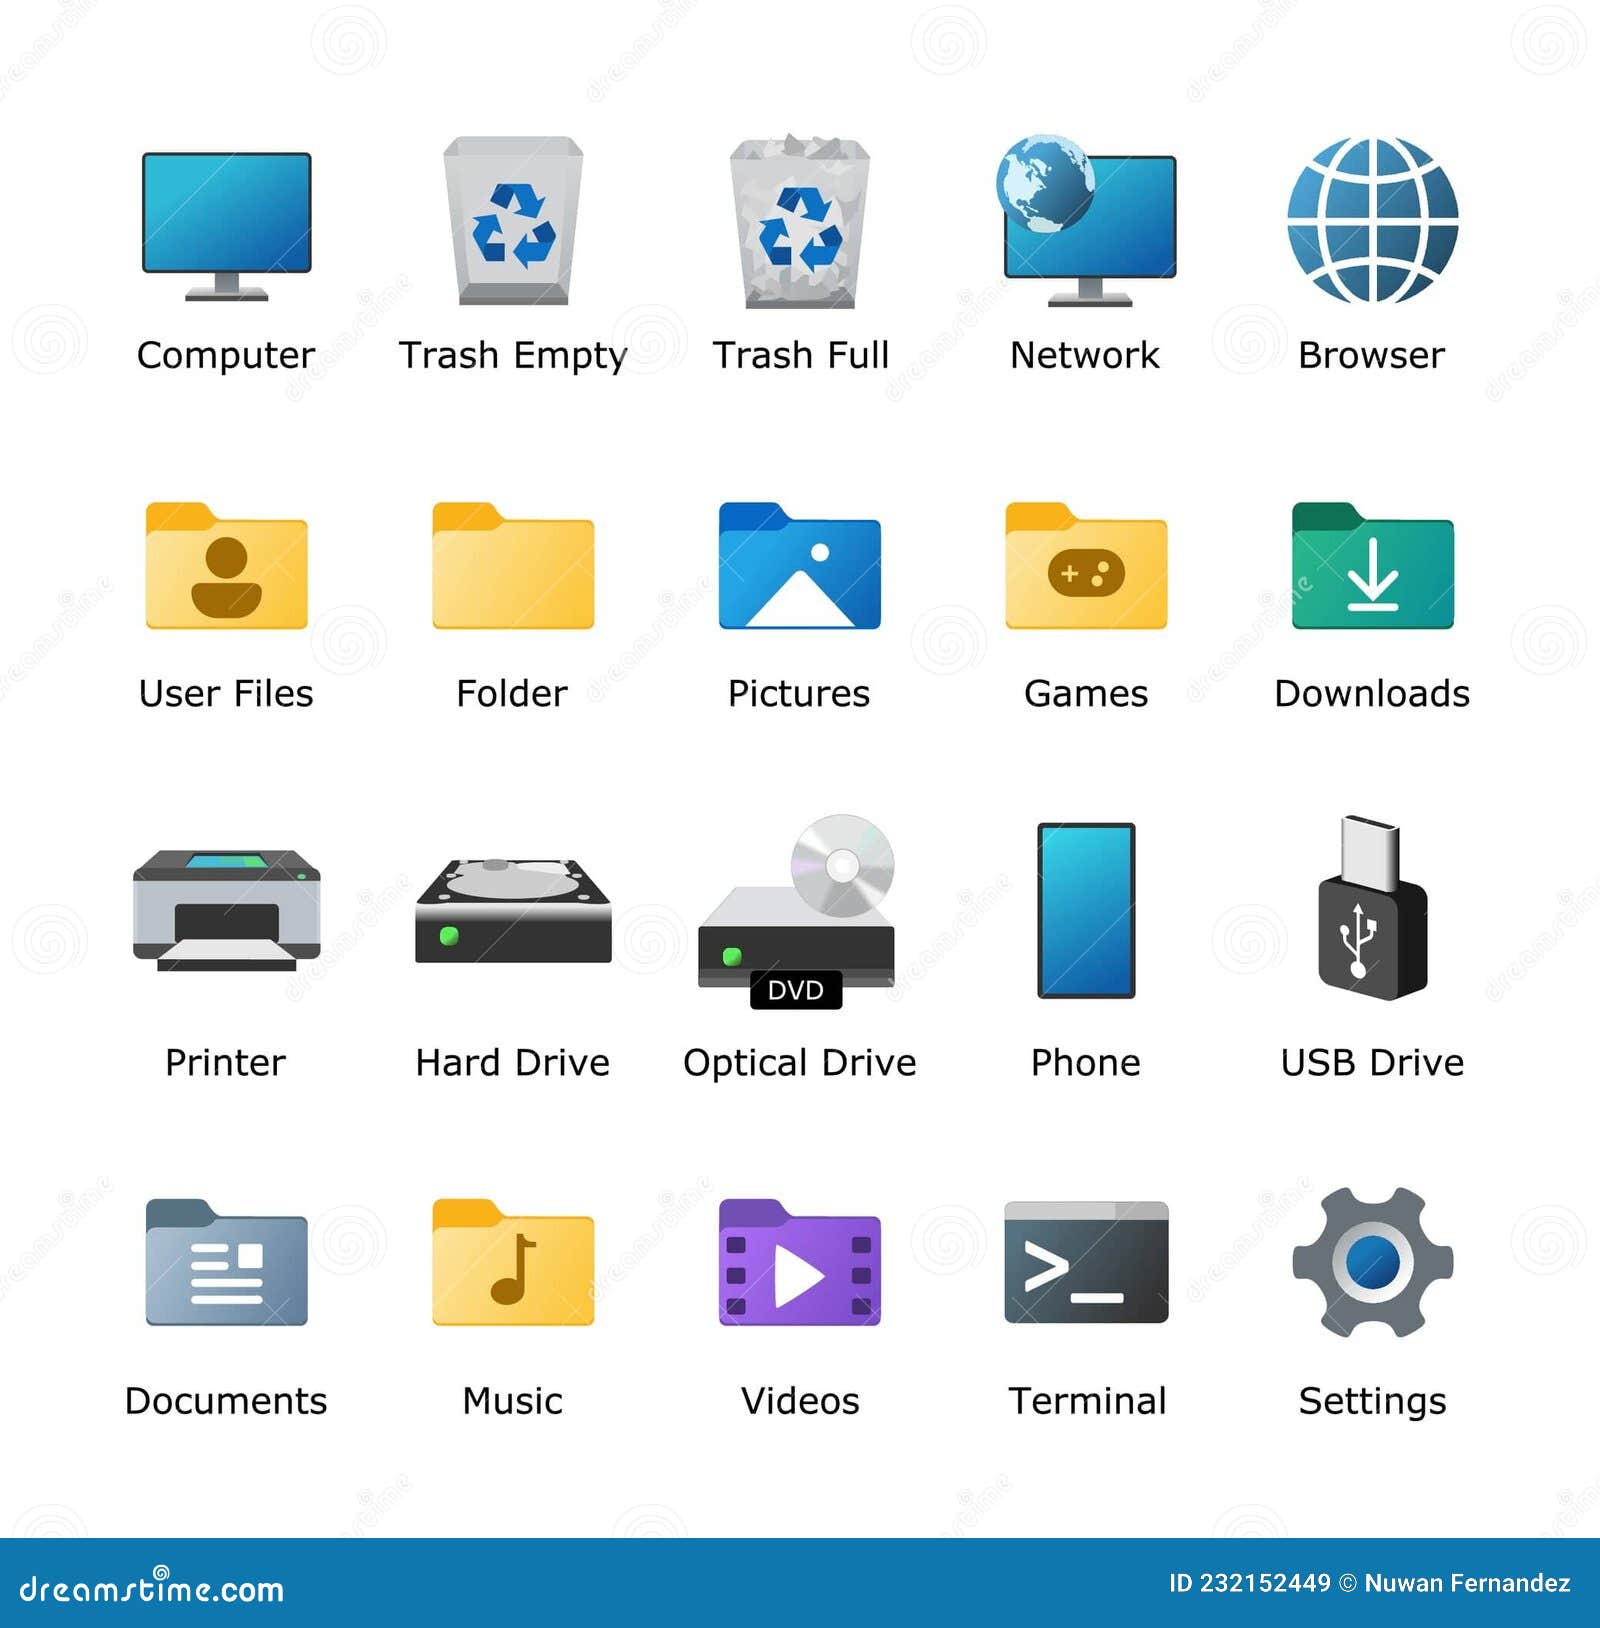 Download windows 11 icons adobe flash player download latest version for windows 8